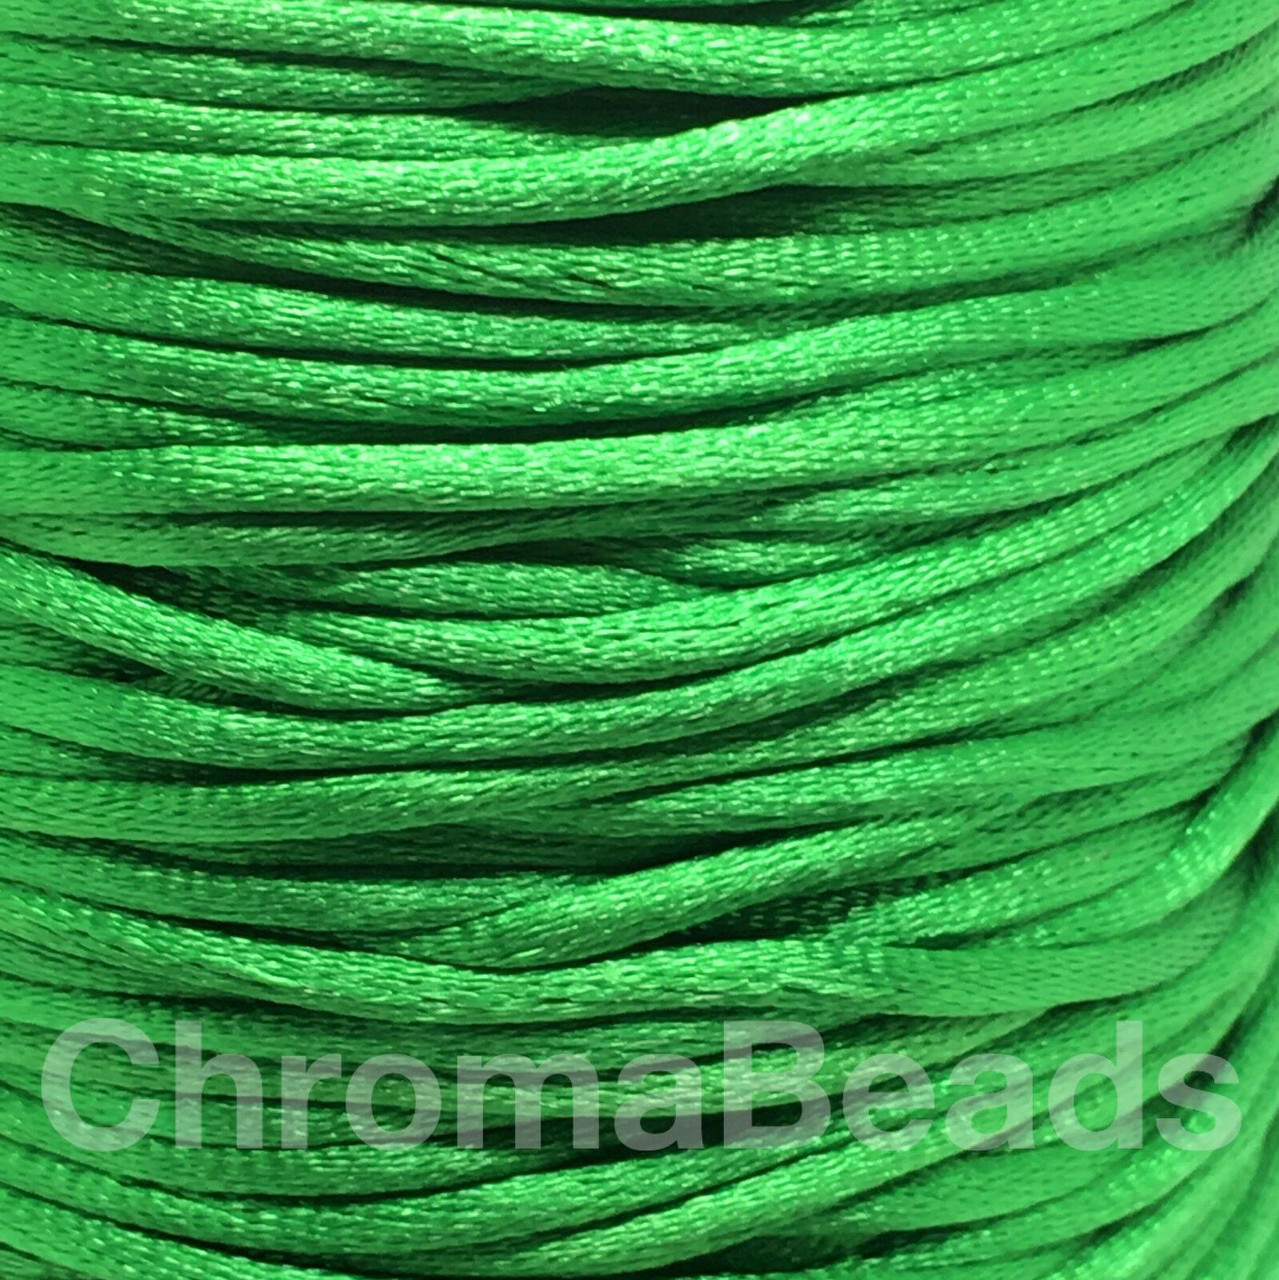 2x Reels of Nylon Cord (Rattail) - Emerald Green, approx 45m each